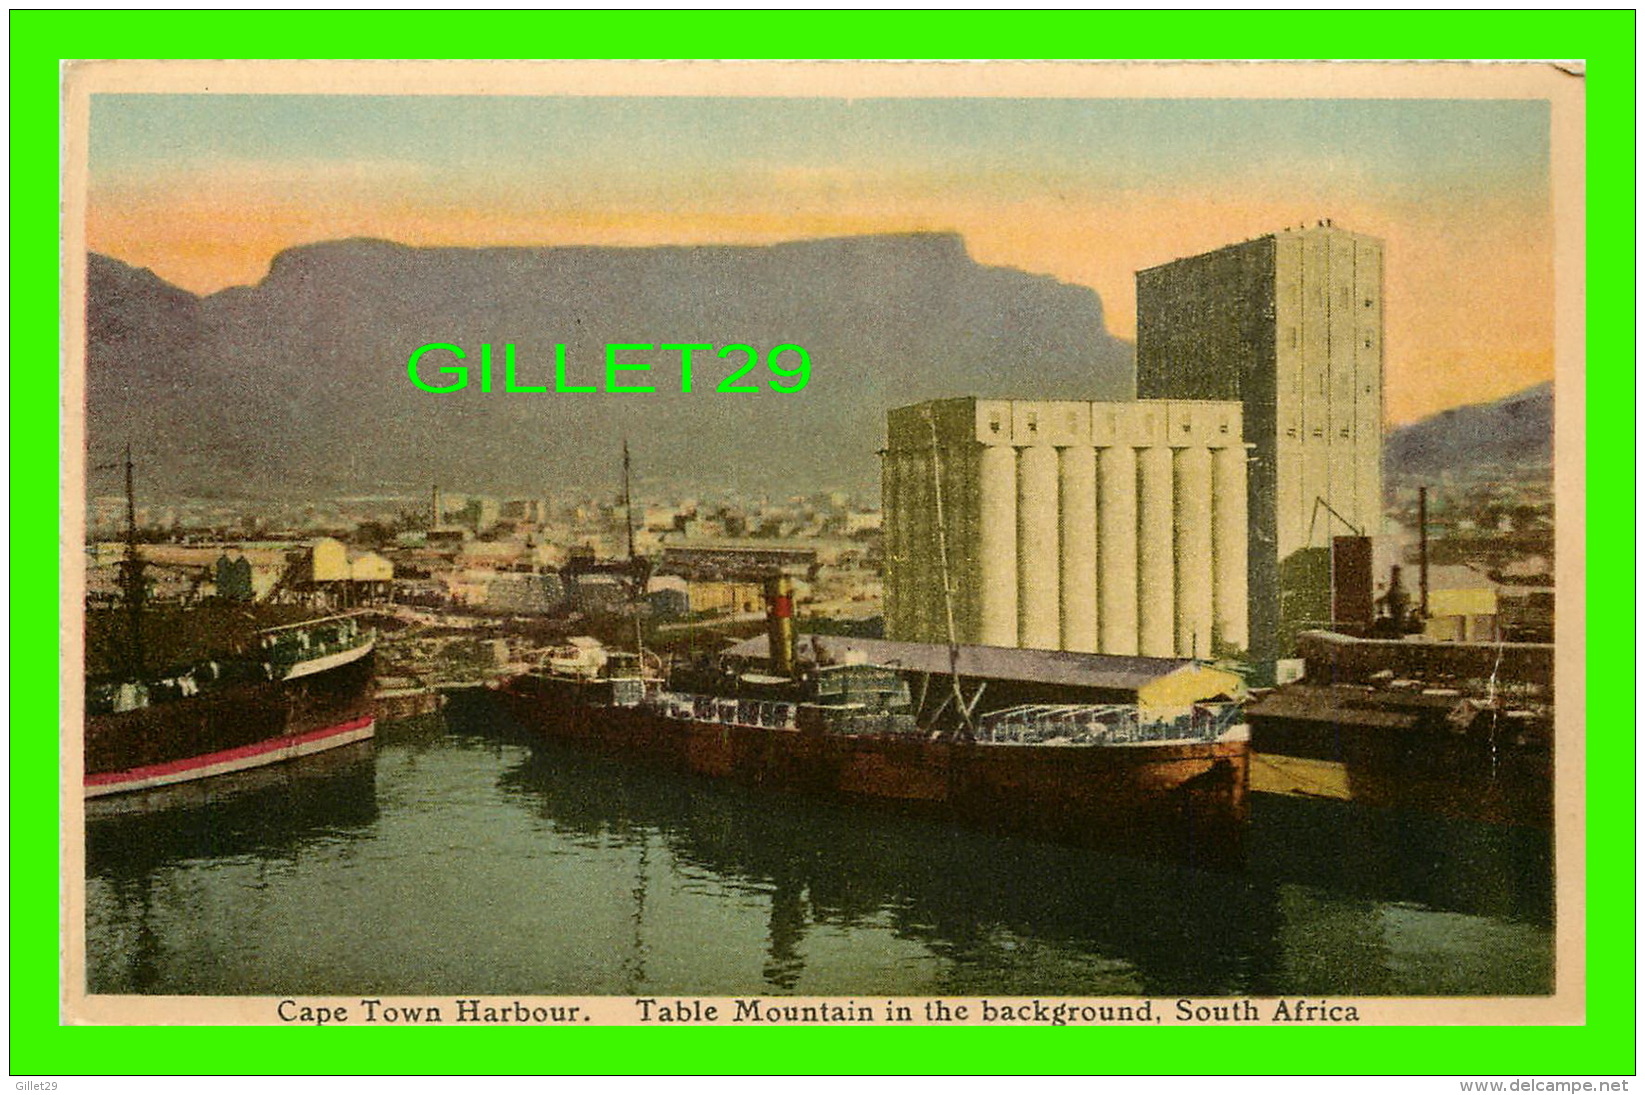 CAPE TOWN, SOUTH AFRICA - HARBOUR, TABLE MOUNTAIN IN THE BACKGROUND - ANIMATED WITH SHIPS - MOFFATS ELECTRIC RANGES - - Zuid-Afrika